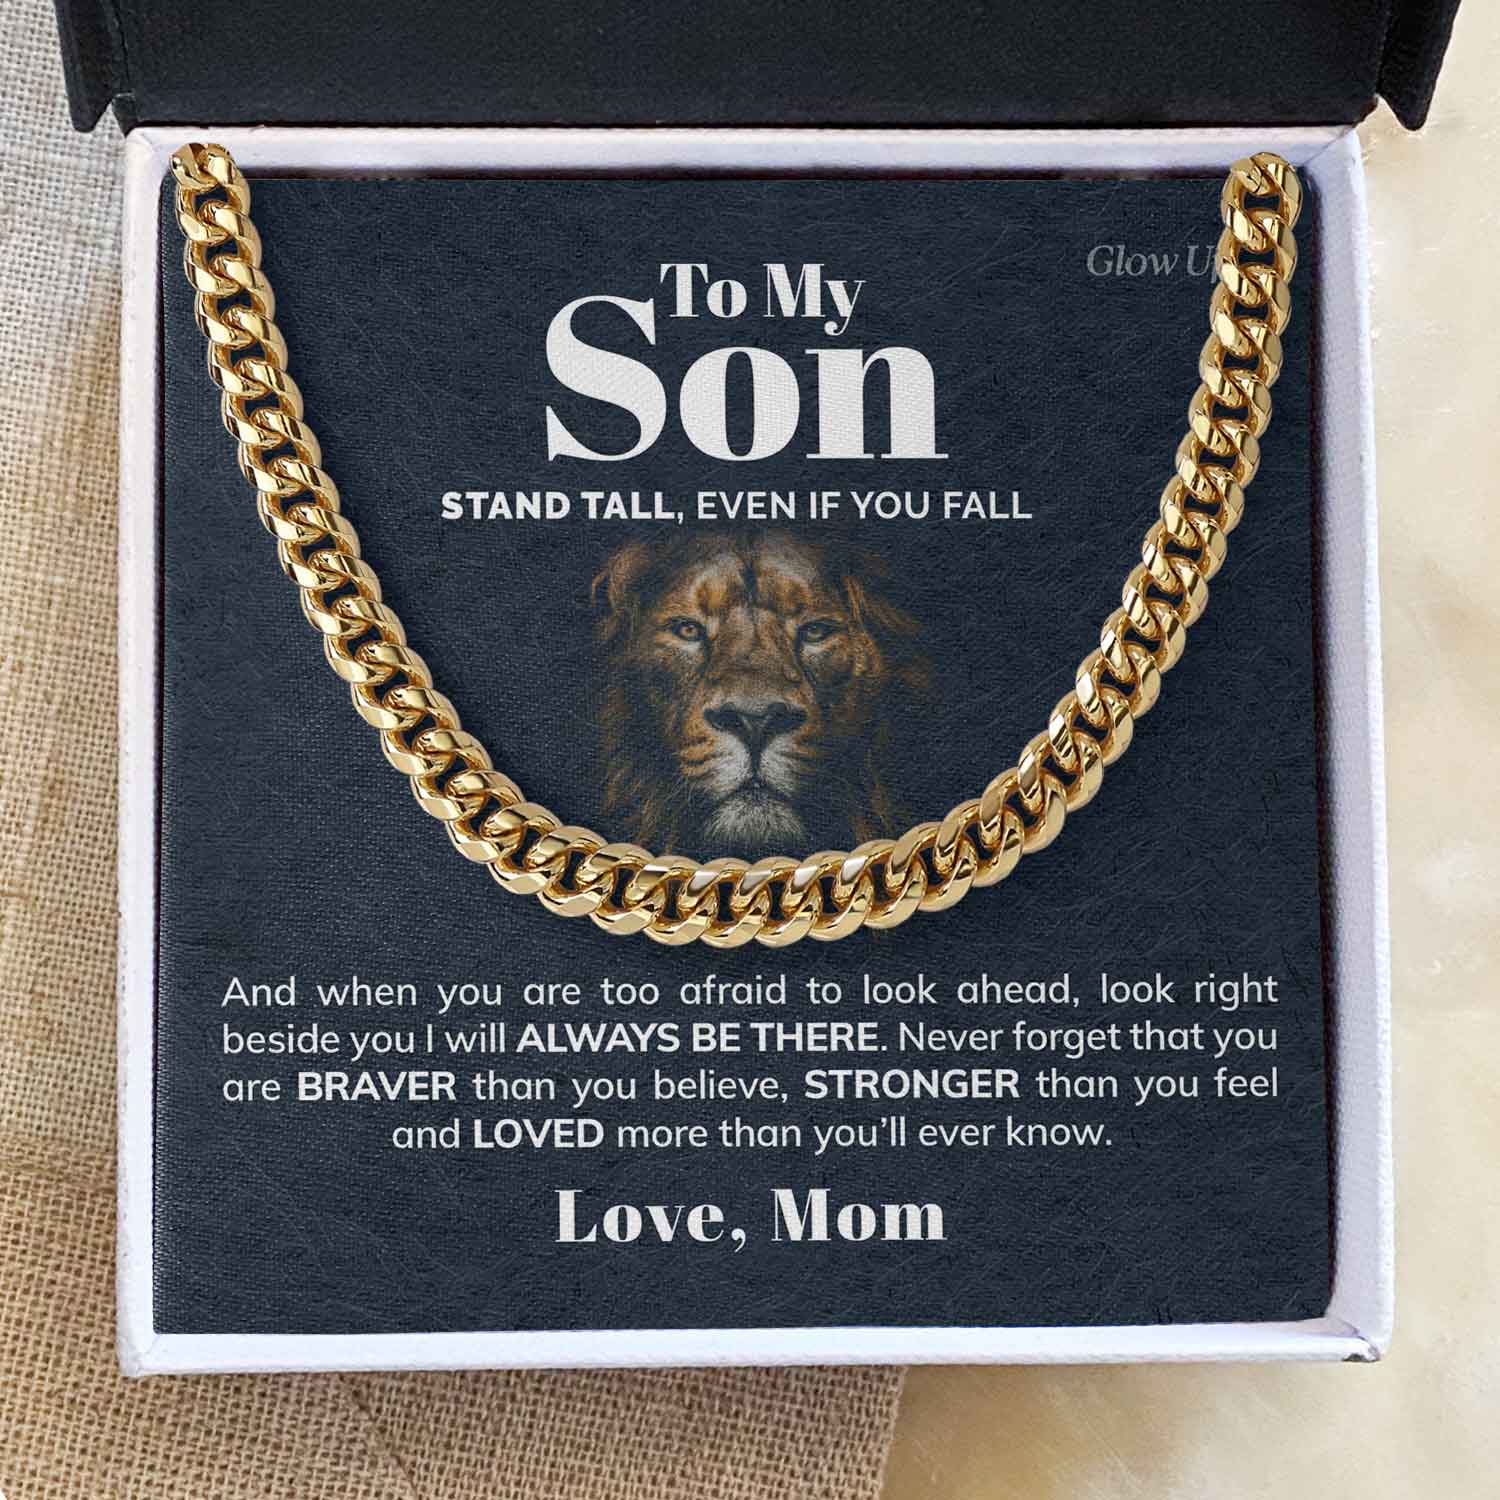 ShineOn Fulfillment Jewelry 14K Yellow Gold Finish / Two-Toned Box To My Son - Stronger than you feel  - Cuban Link Chan